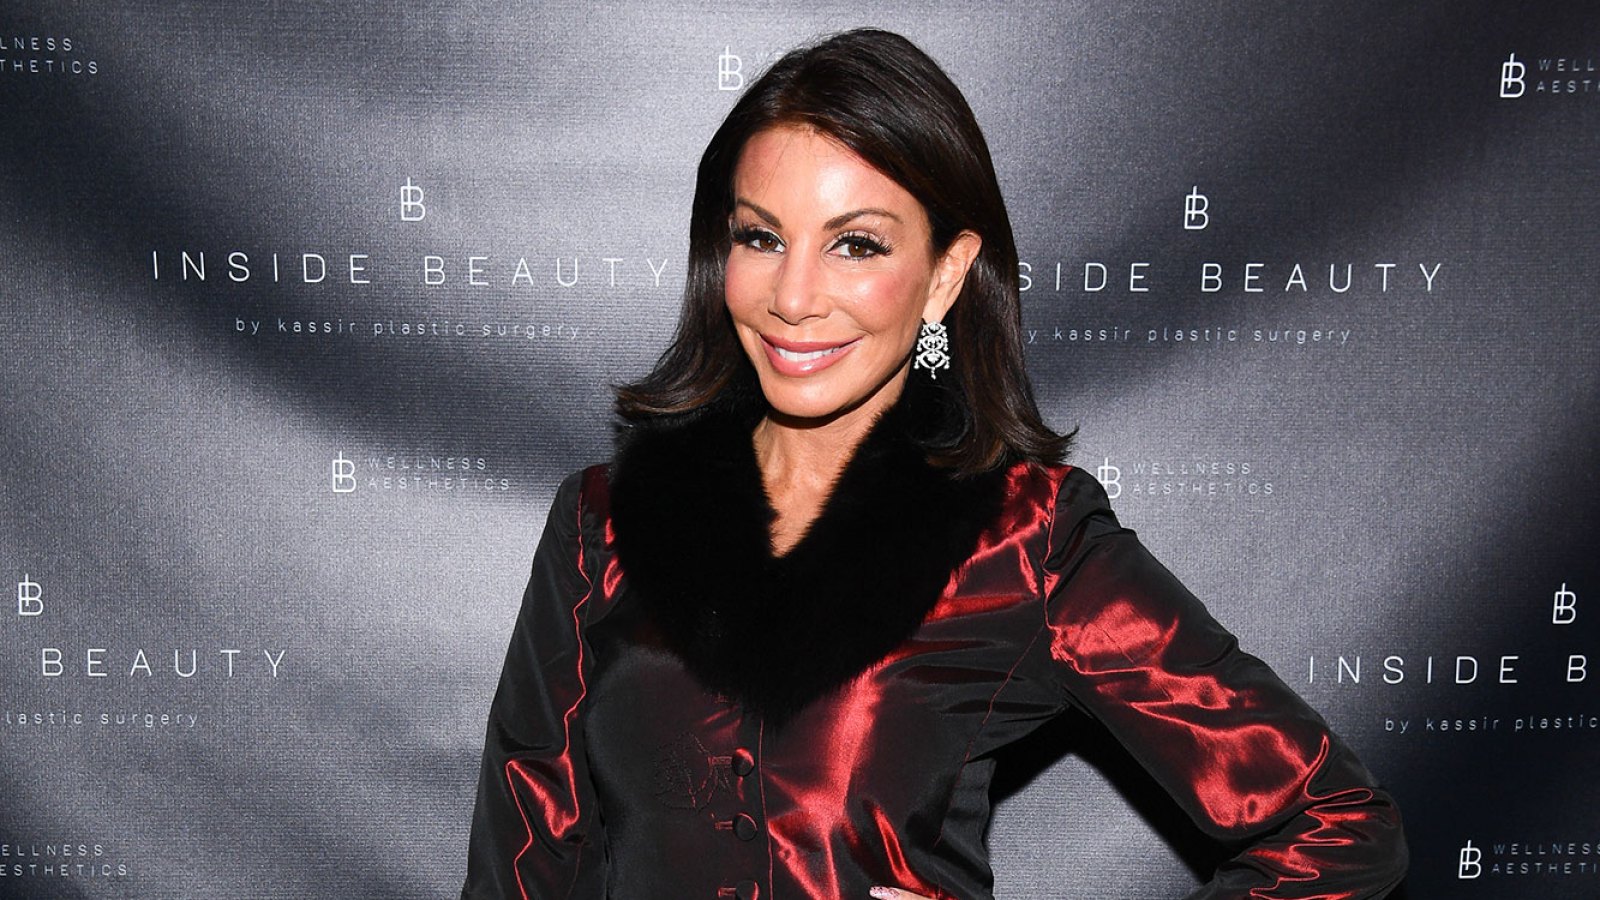 Danielle Staub Is ‘Very Much in Love’ With Businessman Oliver Maier After Divorce From Marty Caffrey